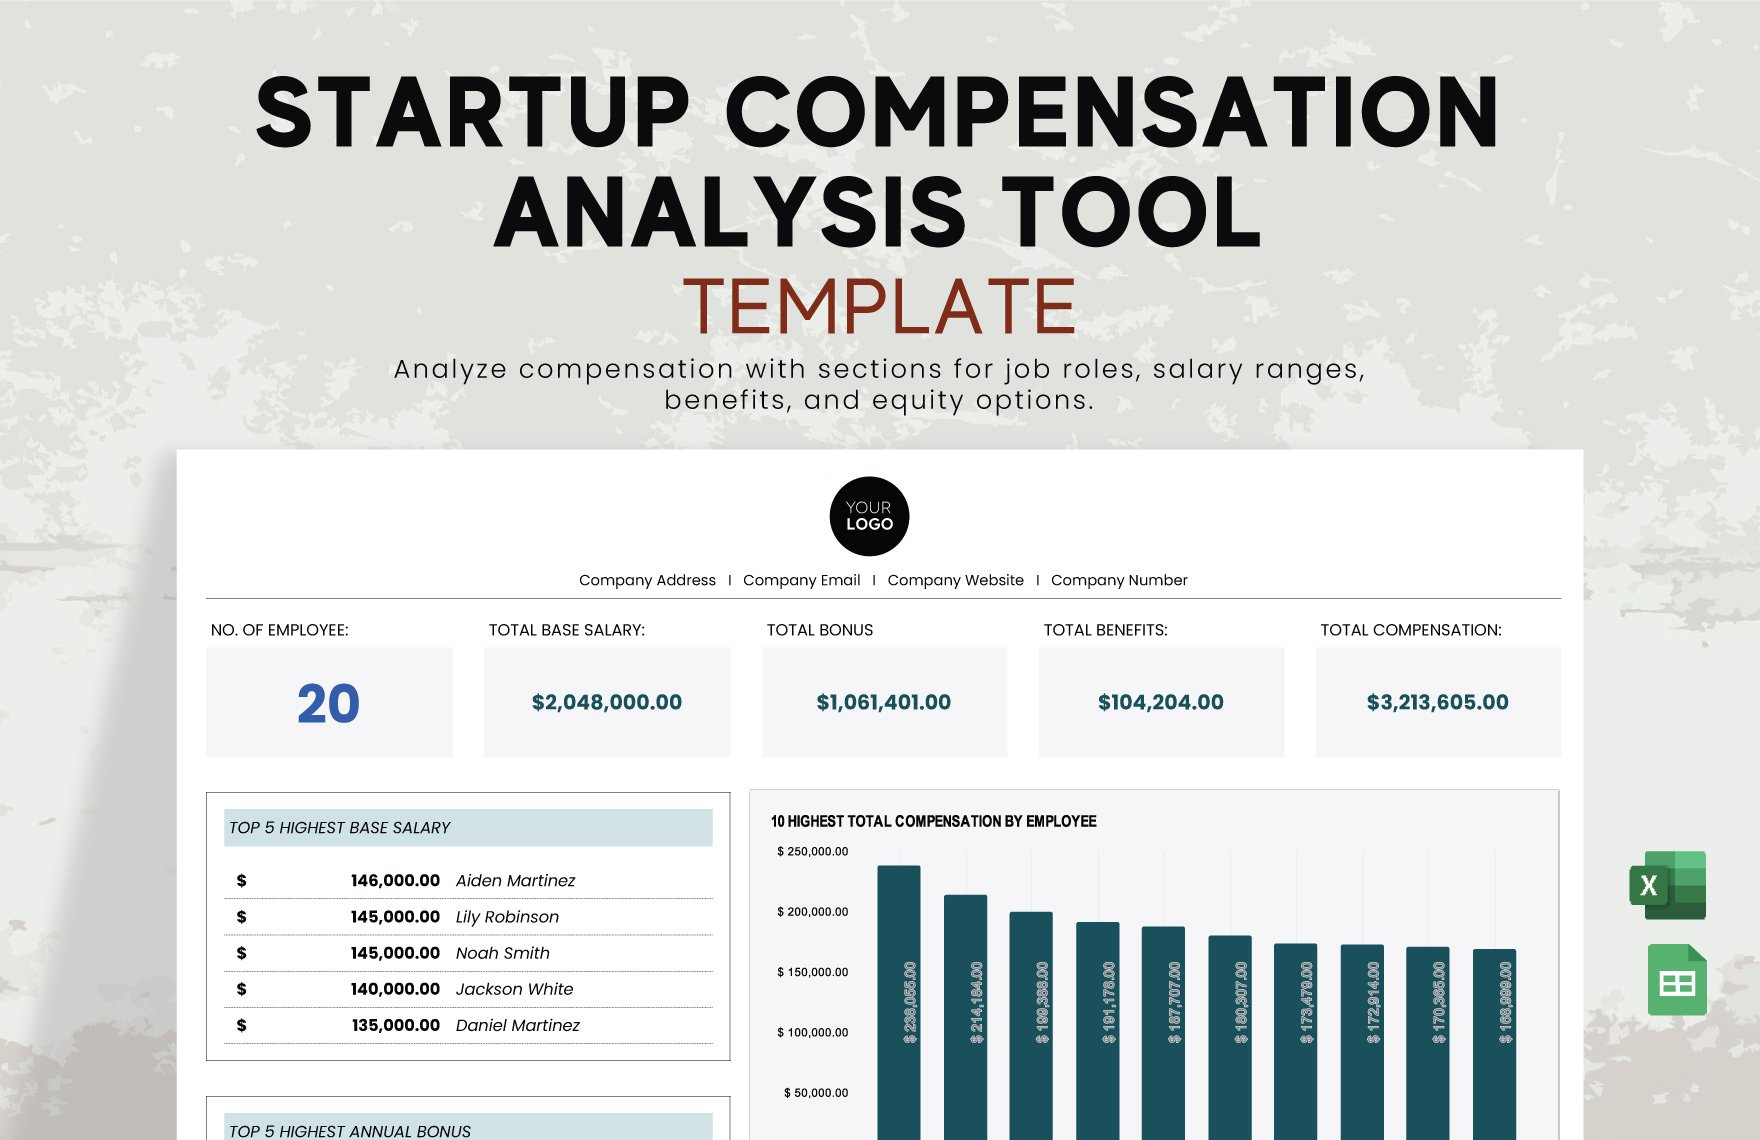 Startup Compensation Analysis Tool Template in Excel, Google Sheets